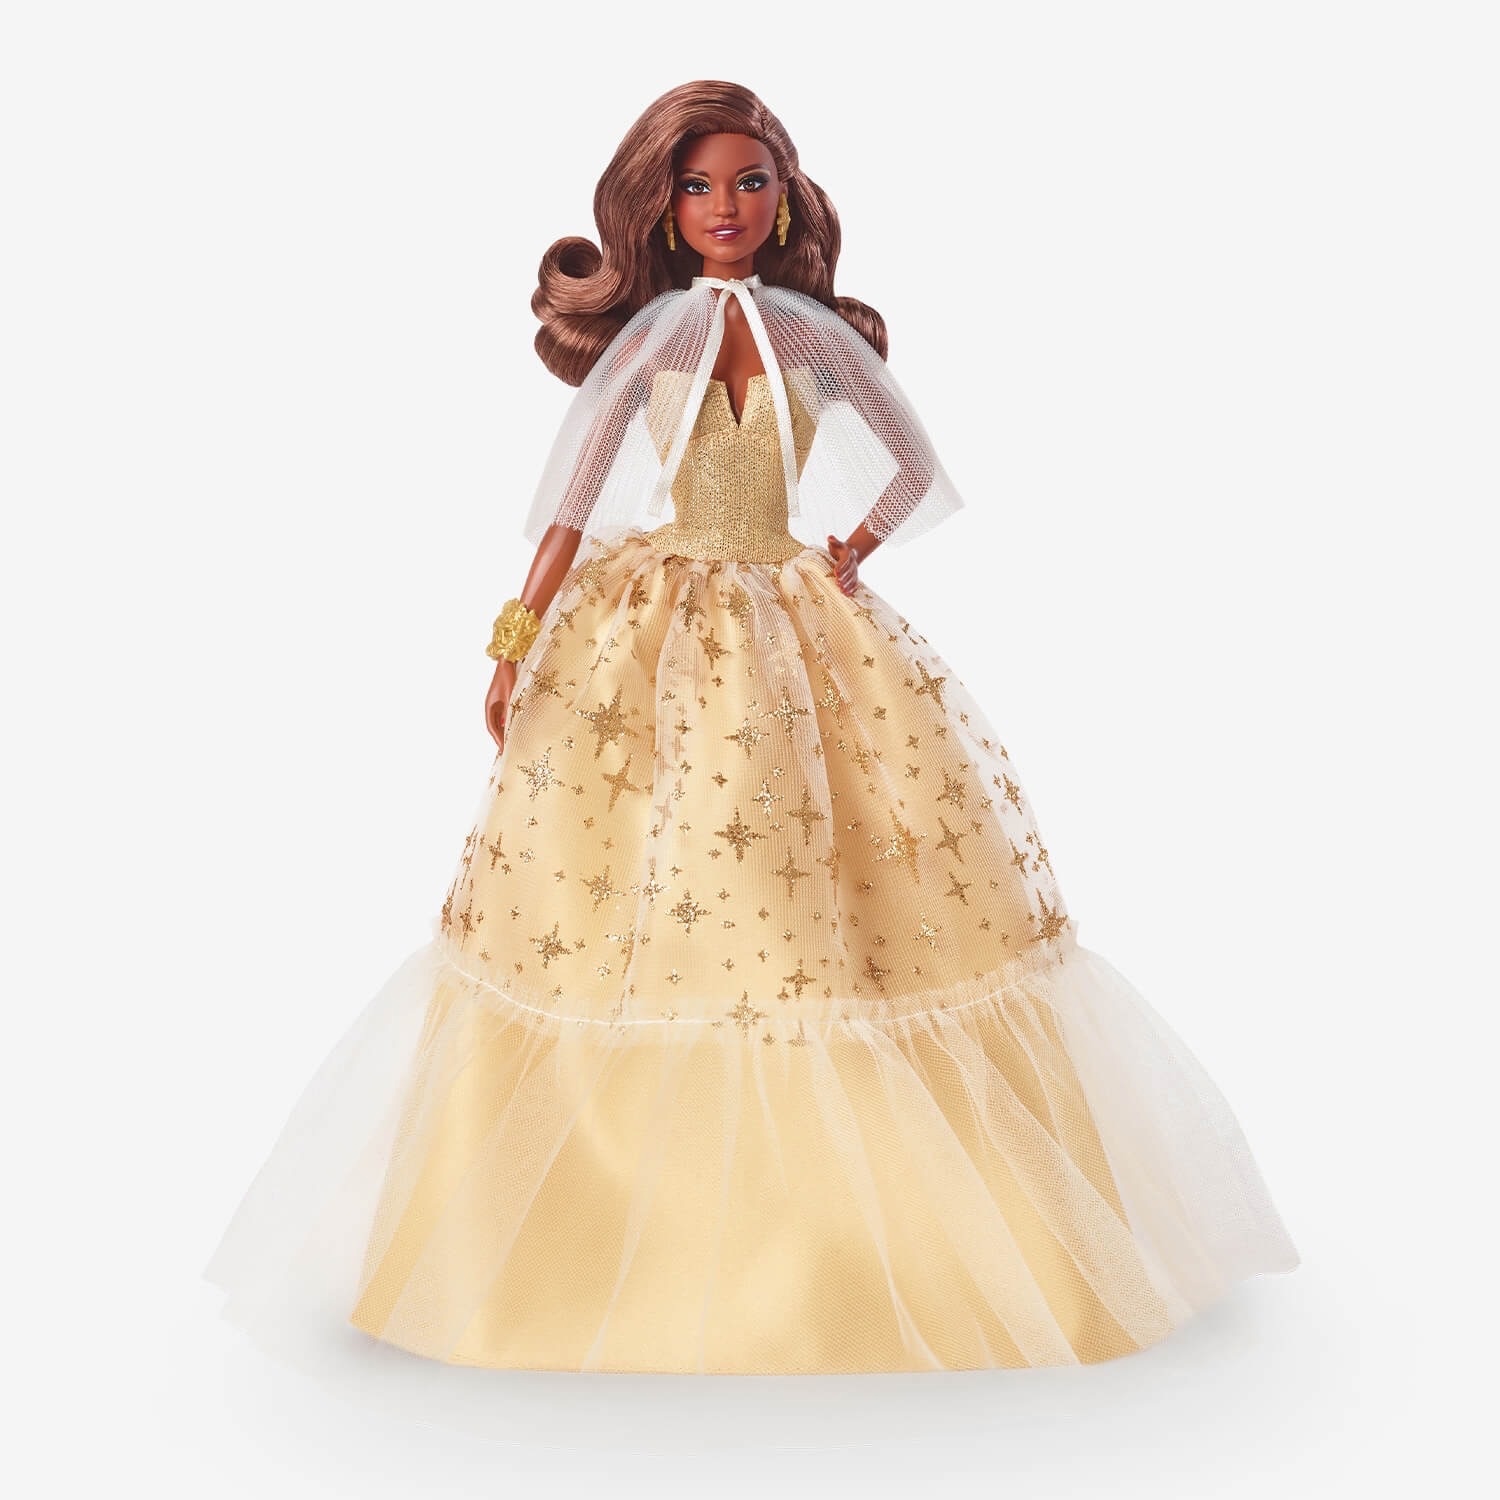 Holiday Barbie 2023 dolls 35th anniversary edition - YouLoveIt.com